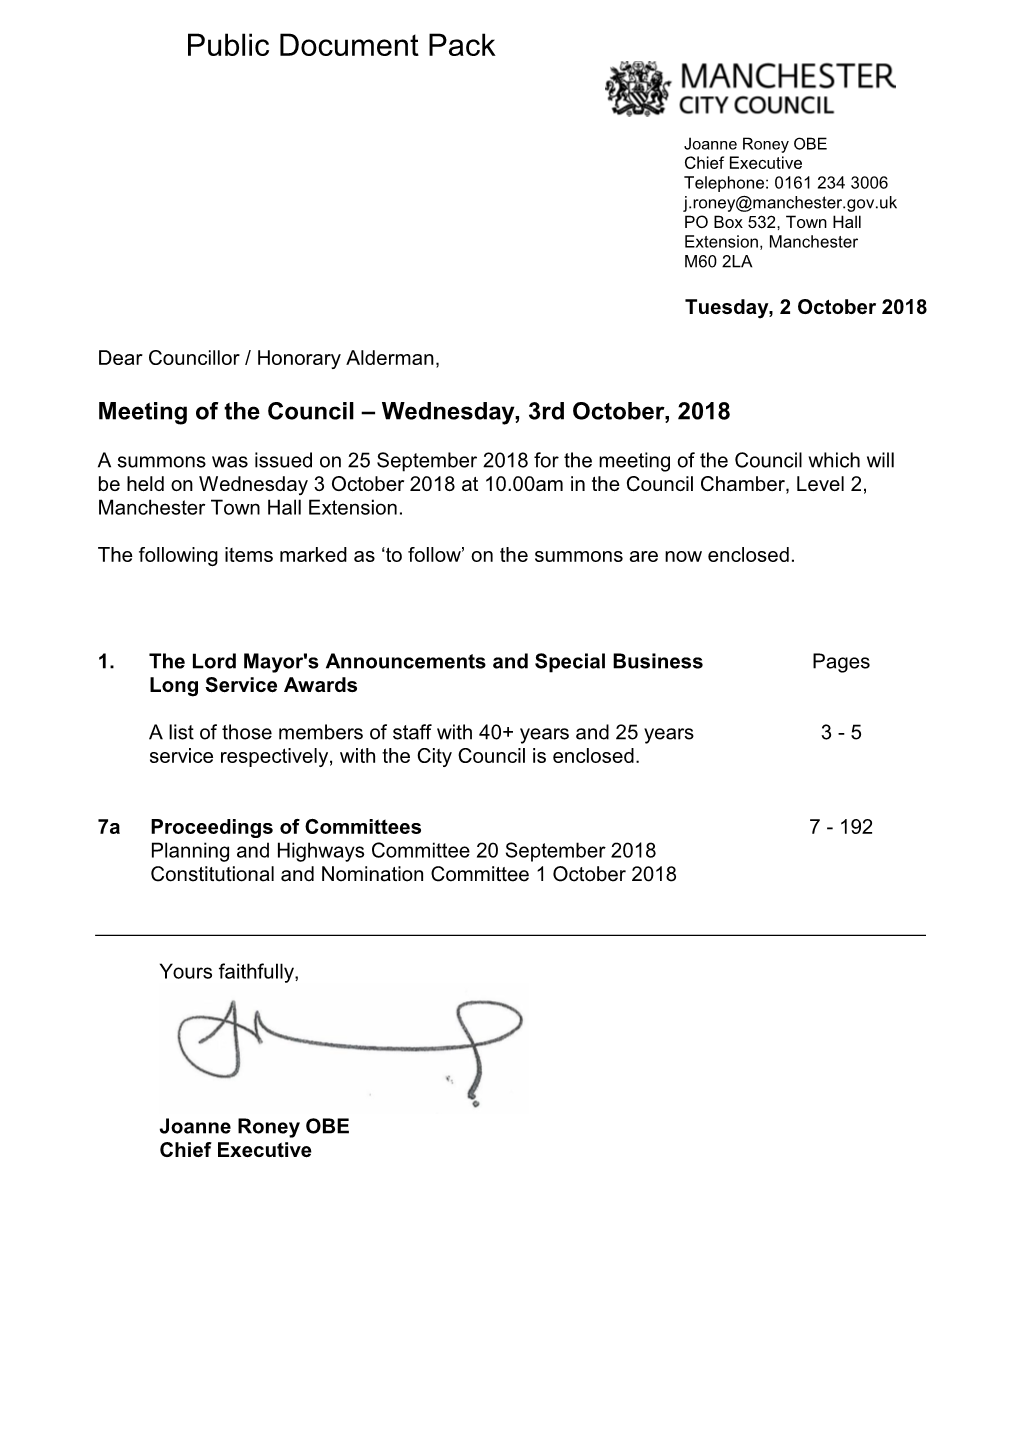 (Public Pack)Supplementary Agenda Pack 2 Agenda Supplement for Council, 03/10/2018 10:00